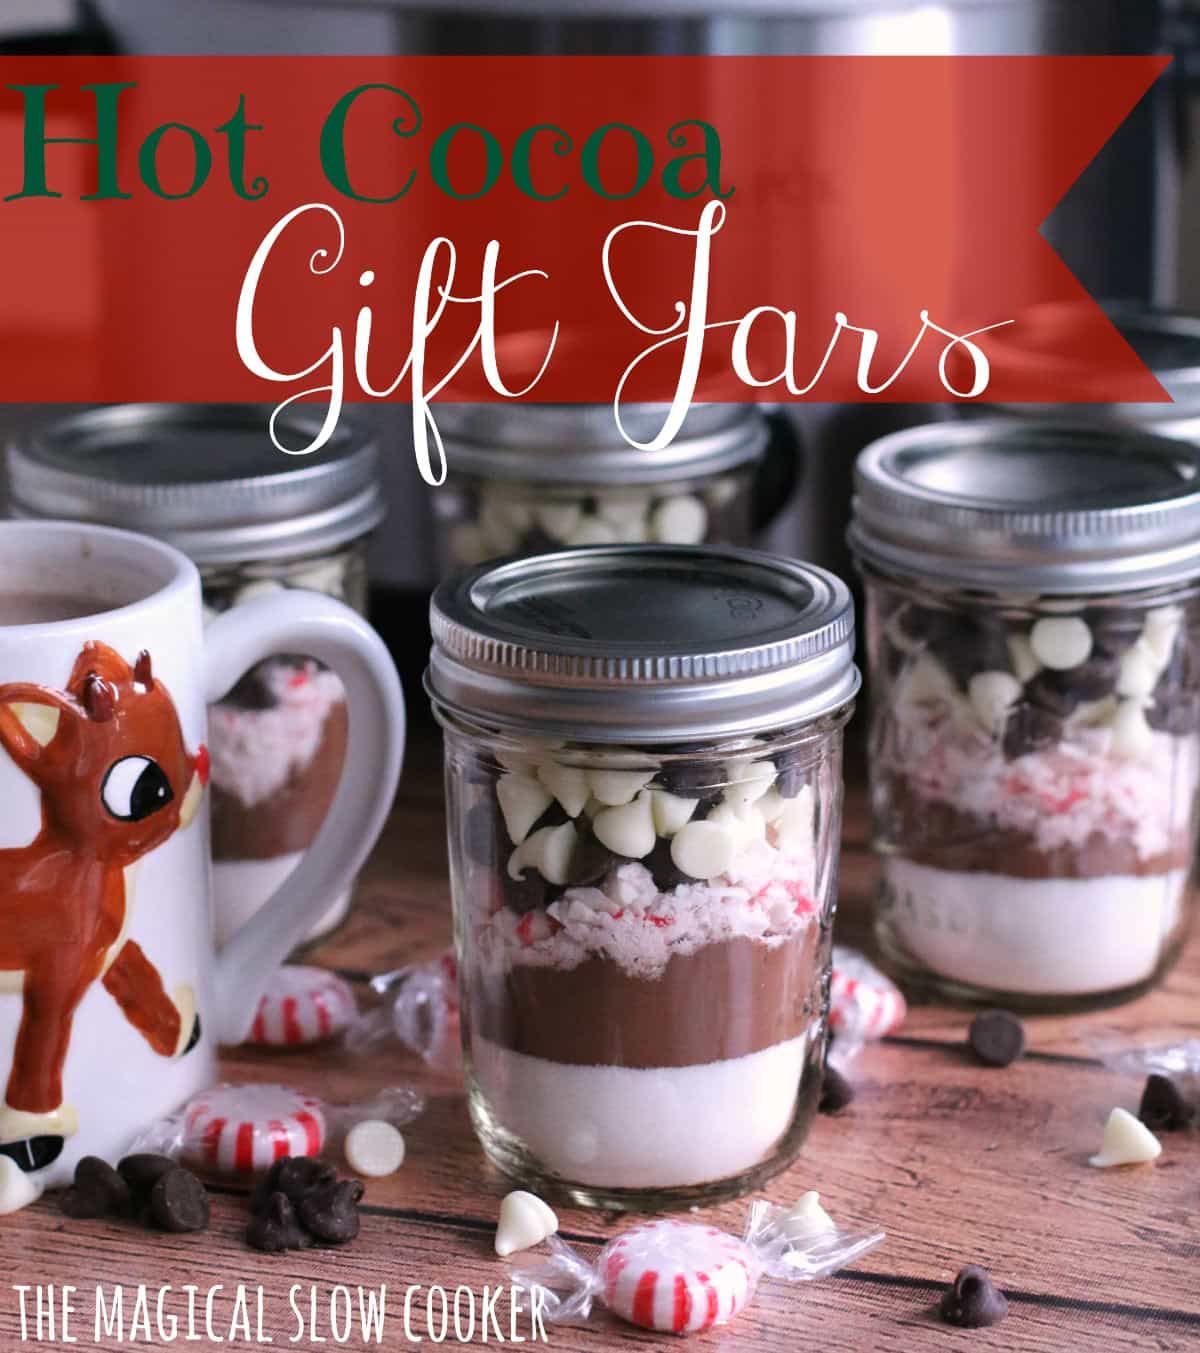 Hot Cocoa Gift Jars The Magical Slow Cooker